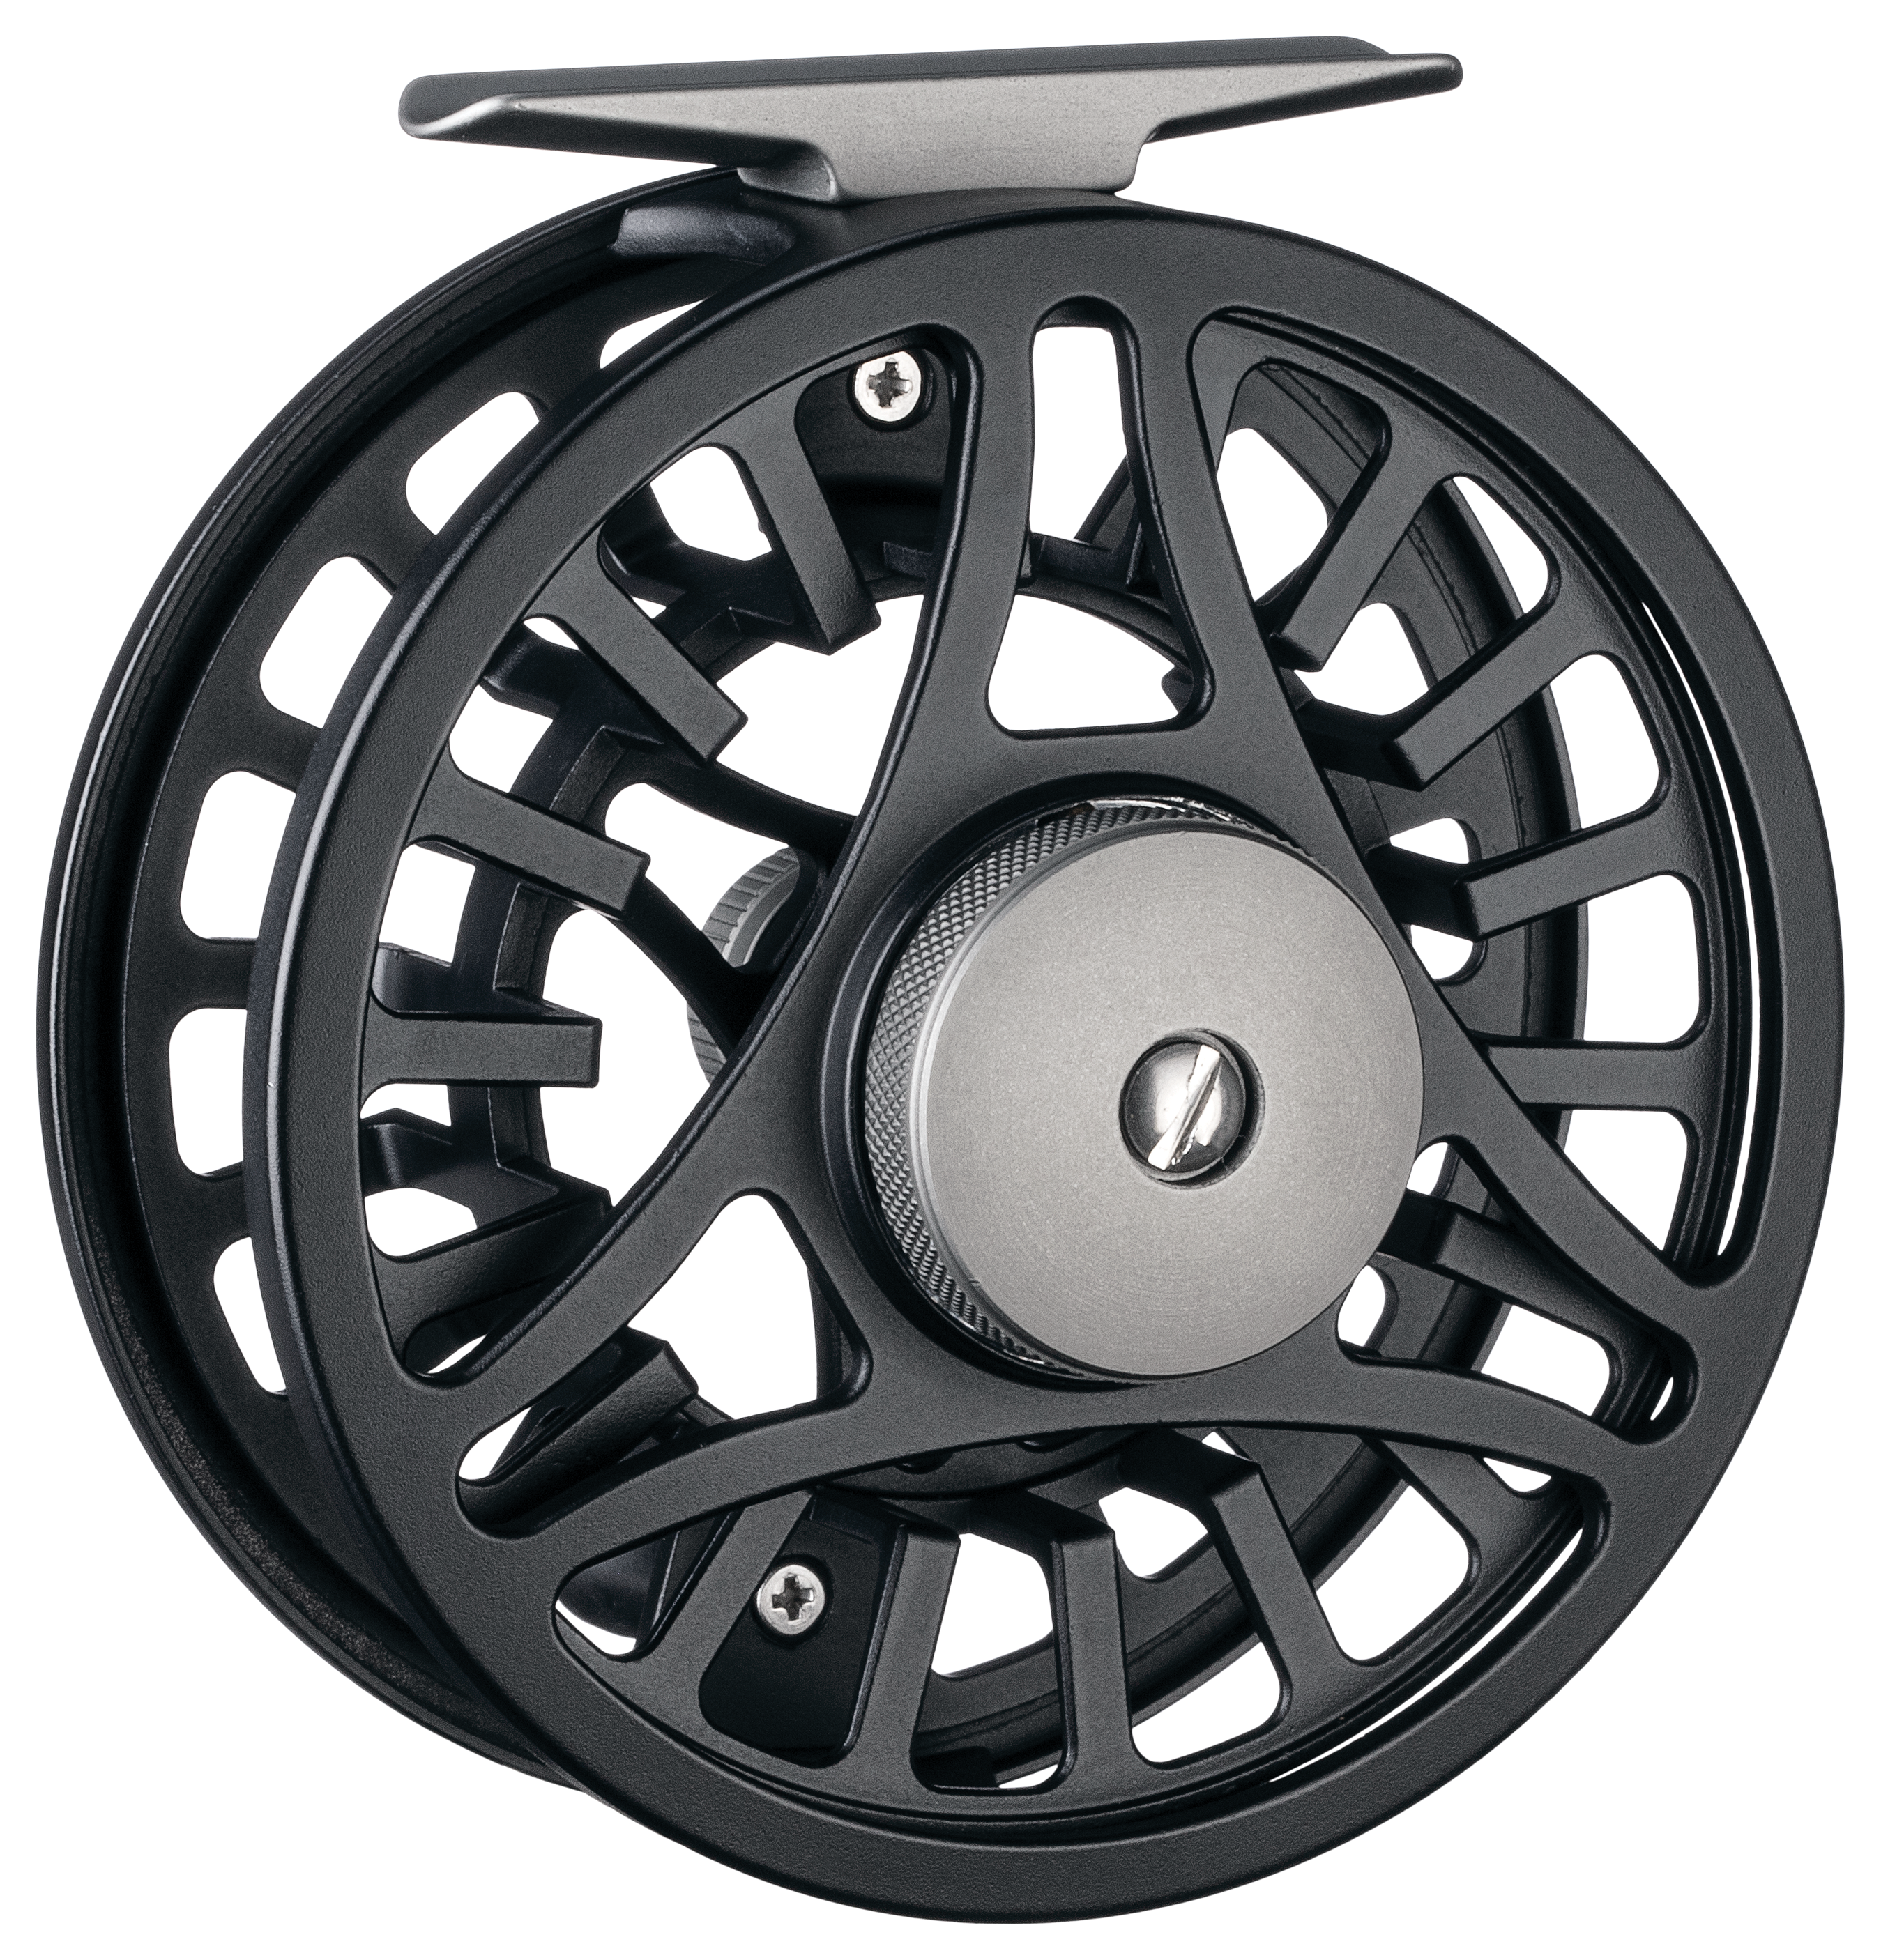 Orvis Hydros Large Arbor Fly Fishing Reel (Silver, I (1-3wt)), Reels -   Canada